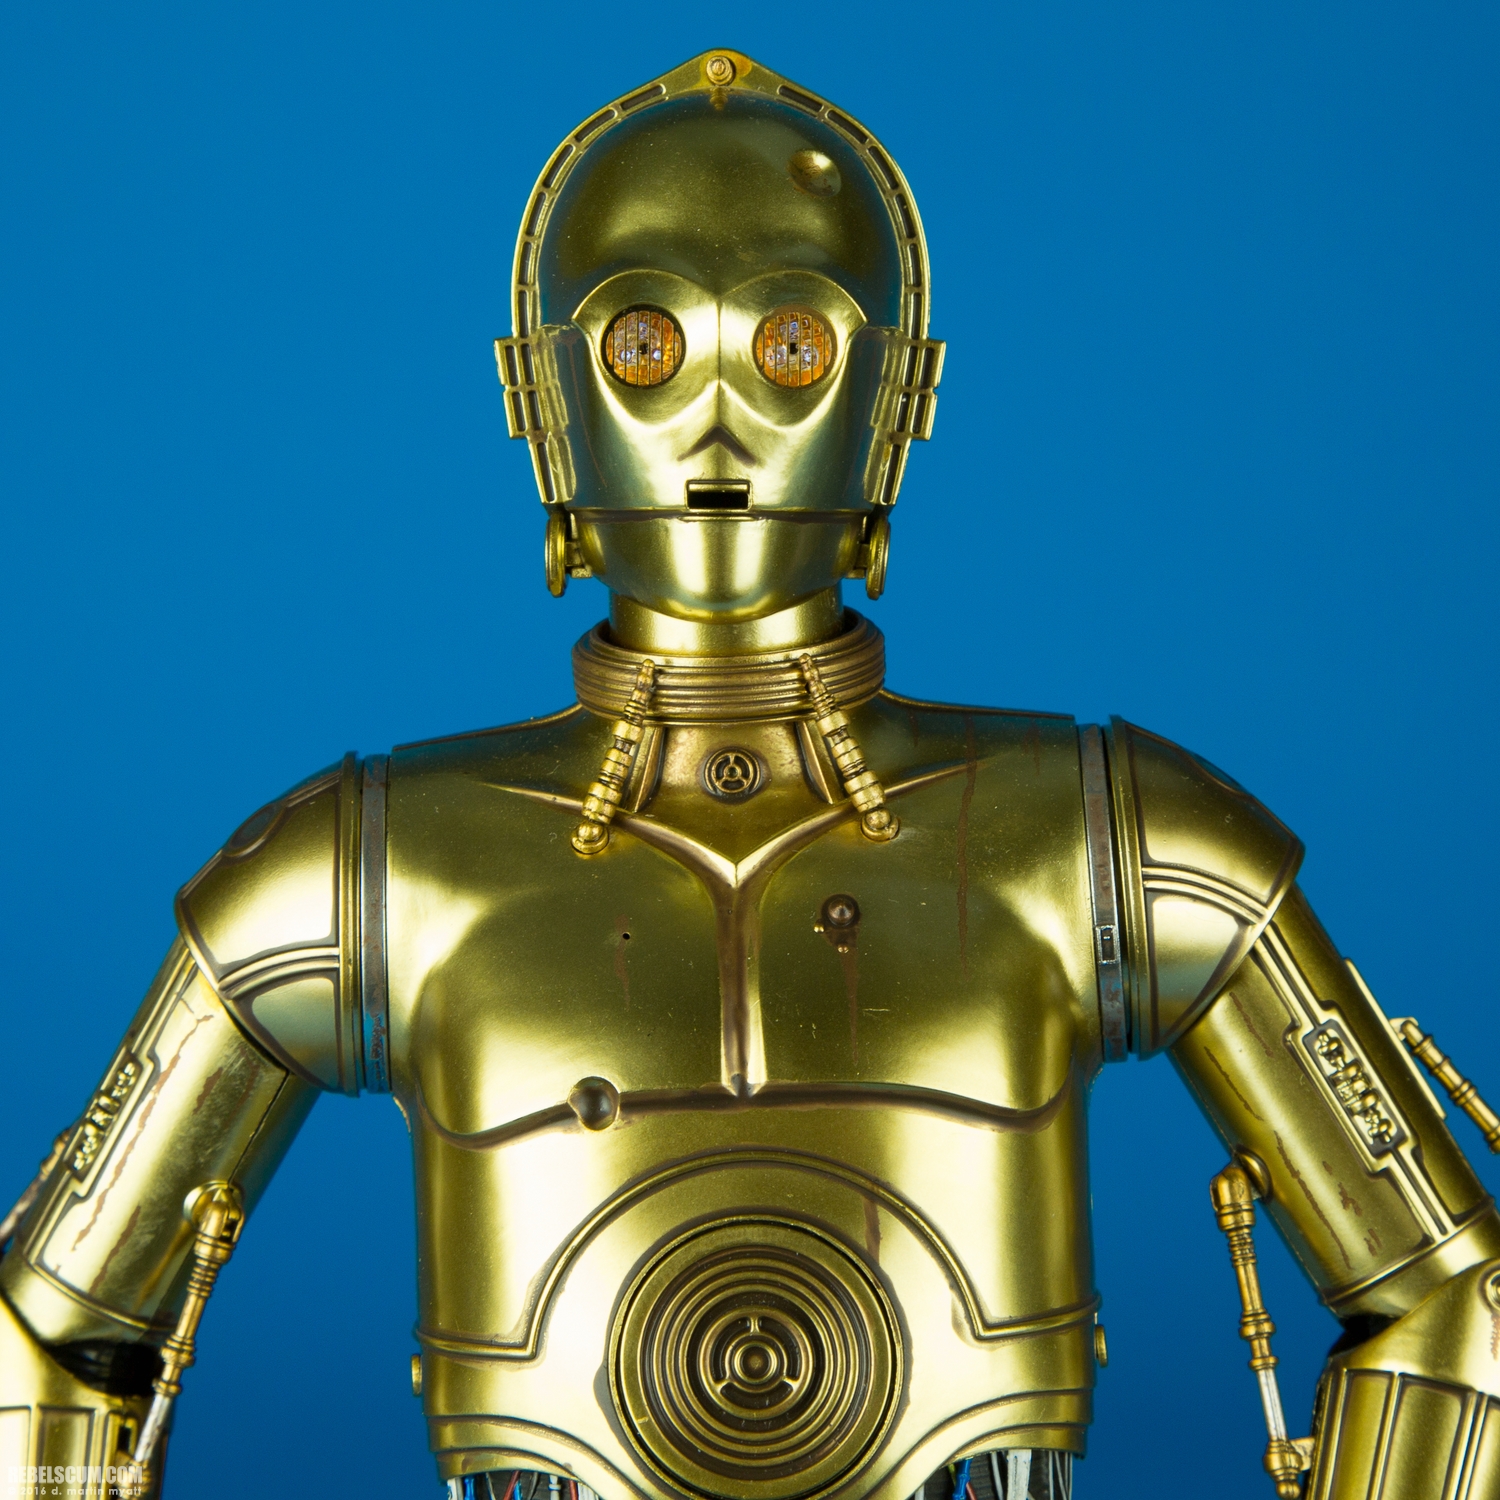 C-3PO-Sixth-Scale-Figure-Sideshow-Collectibles-009.jpg